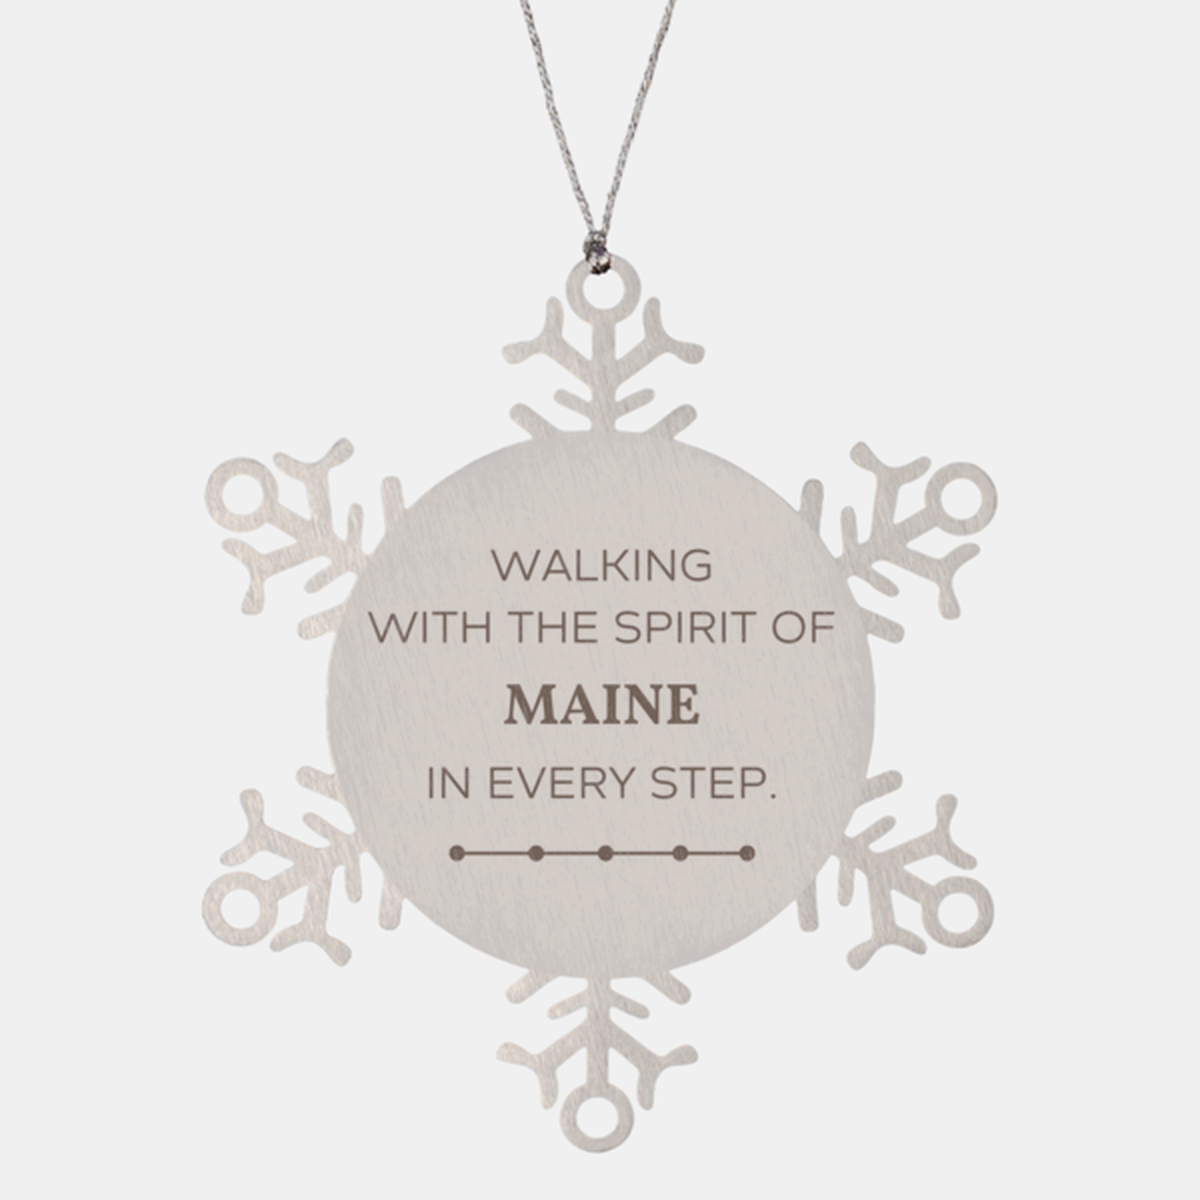 Maine Gifts, Walking with the spirit, Love Maine Birthday Christmas Snowflake Ornament For Maine People, Men, Women, Friends